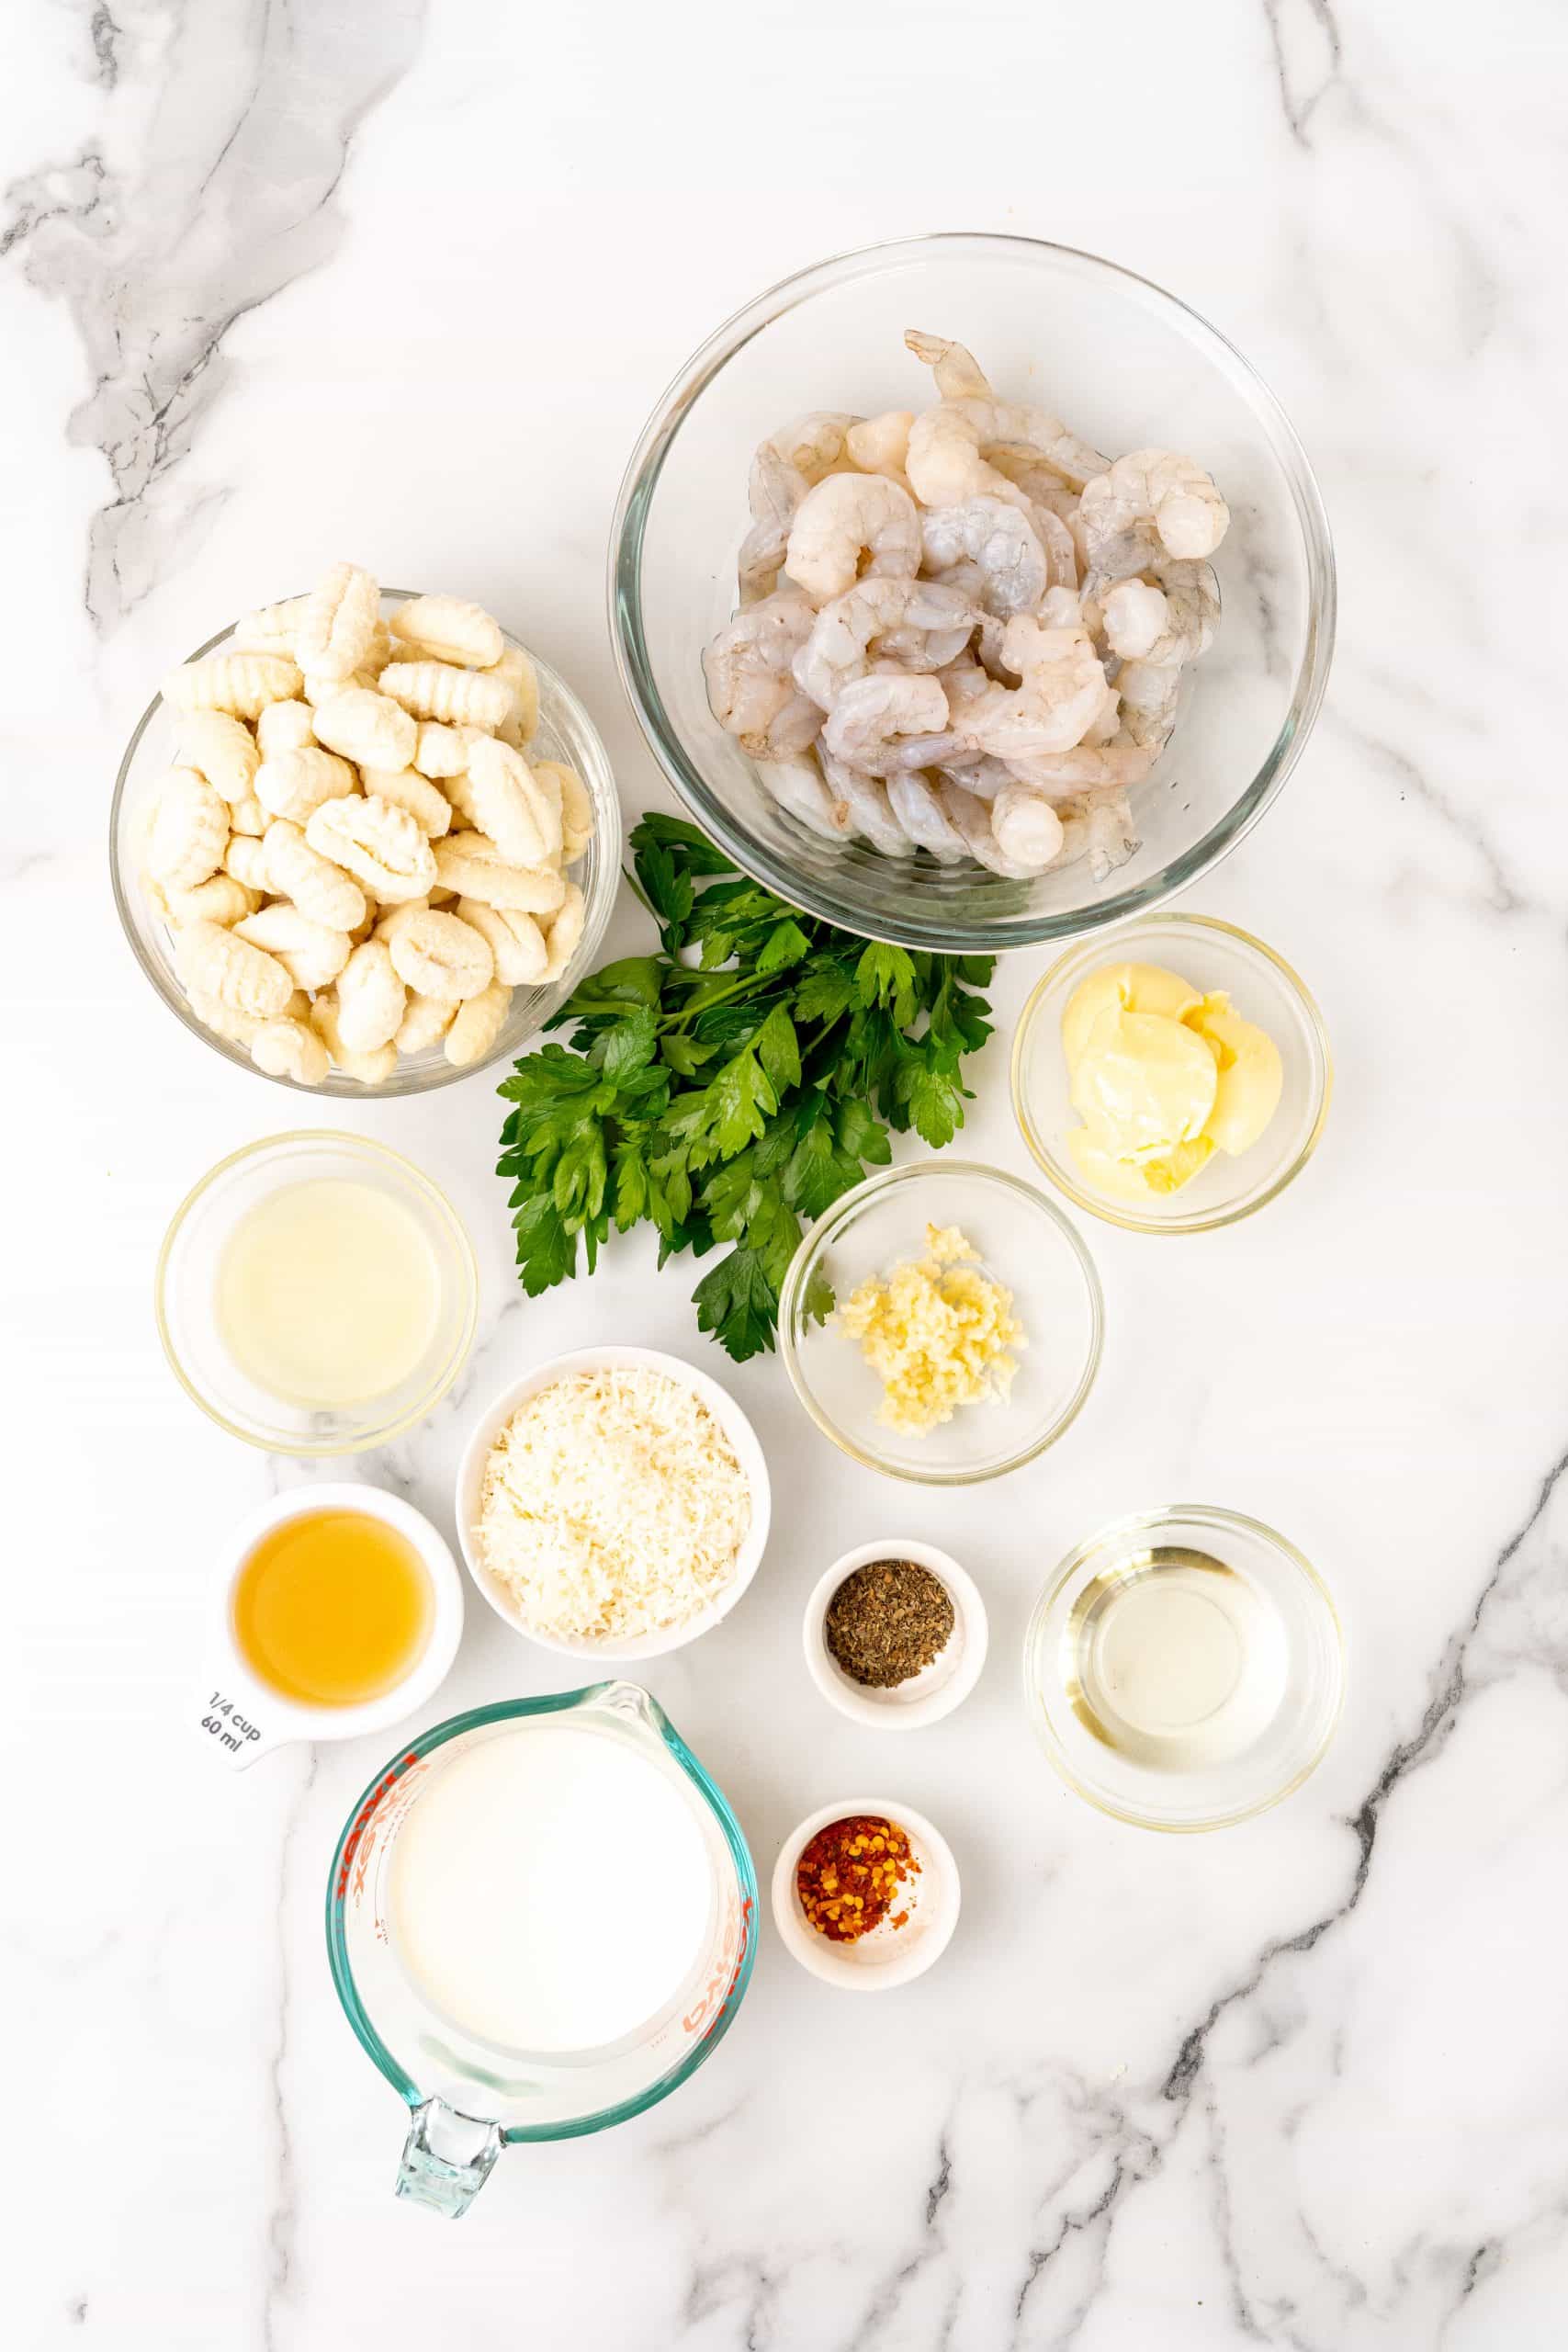 an overhead image showing the measured ingredients needed to make gnocchi shrimp scampi